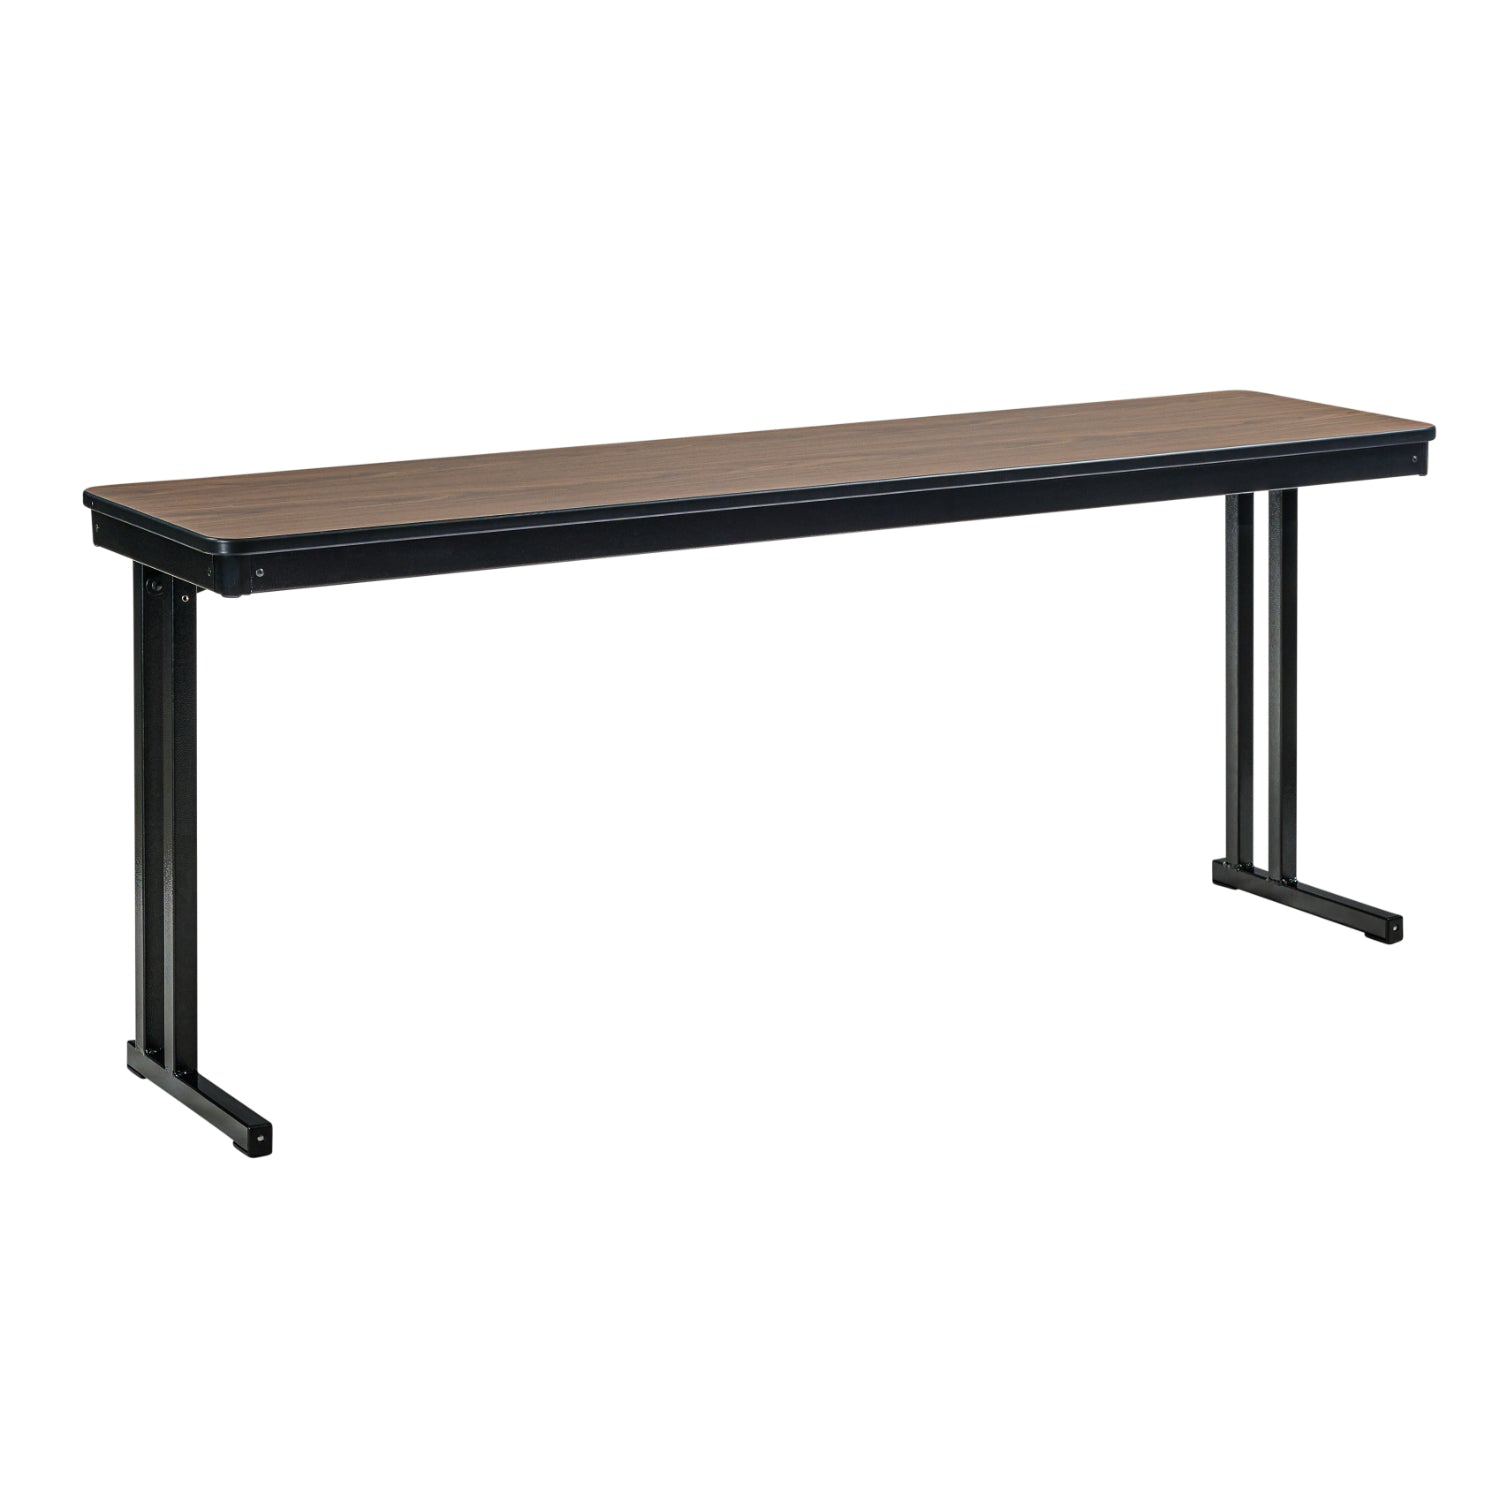 Max Seating Folding Training and Seminar Table with Cantilever Legs, 18" x 48", High Pressure Laminate Top with Plywood Core/T-Mold Edge